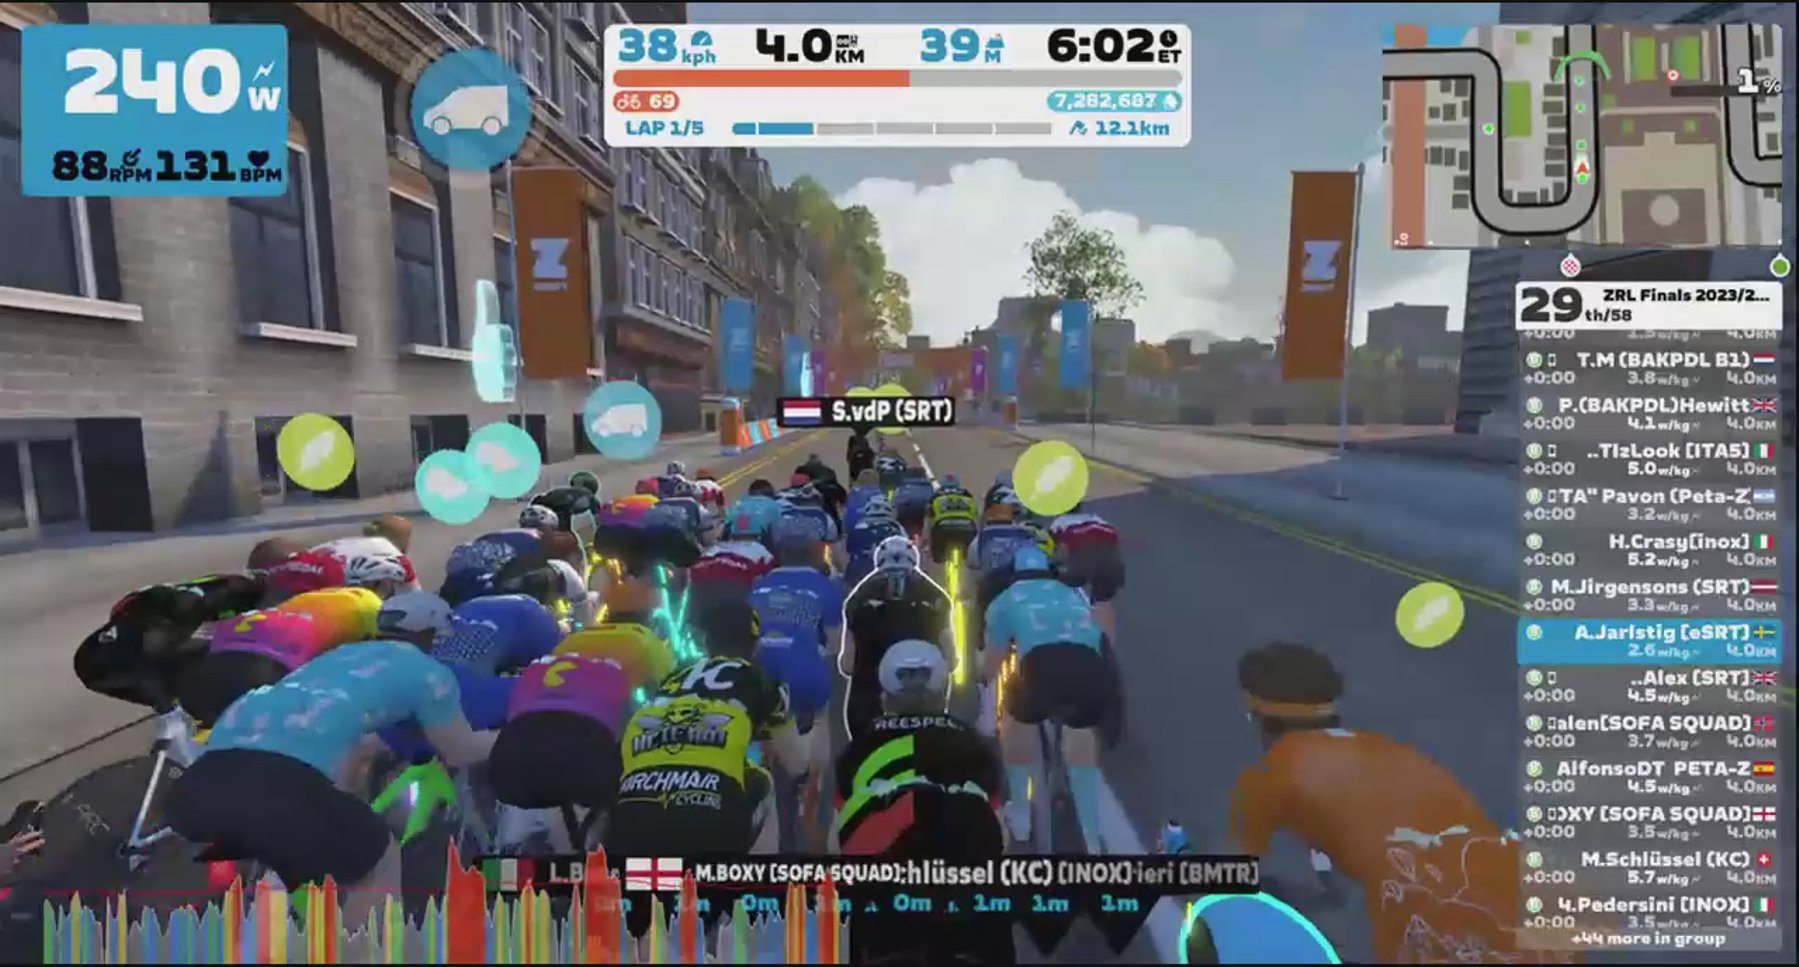 Zwift - Race: ZRL Finals 2023/24 - Open EMEAE Division 2 - Cup Final (Part2) (B) on Glasgow Reverse in Scotland